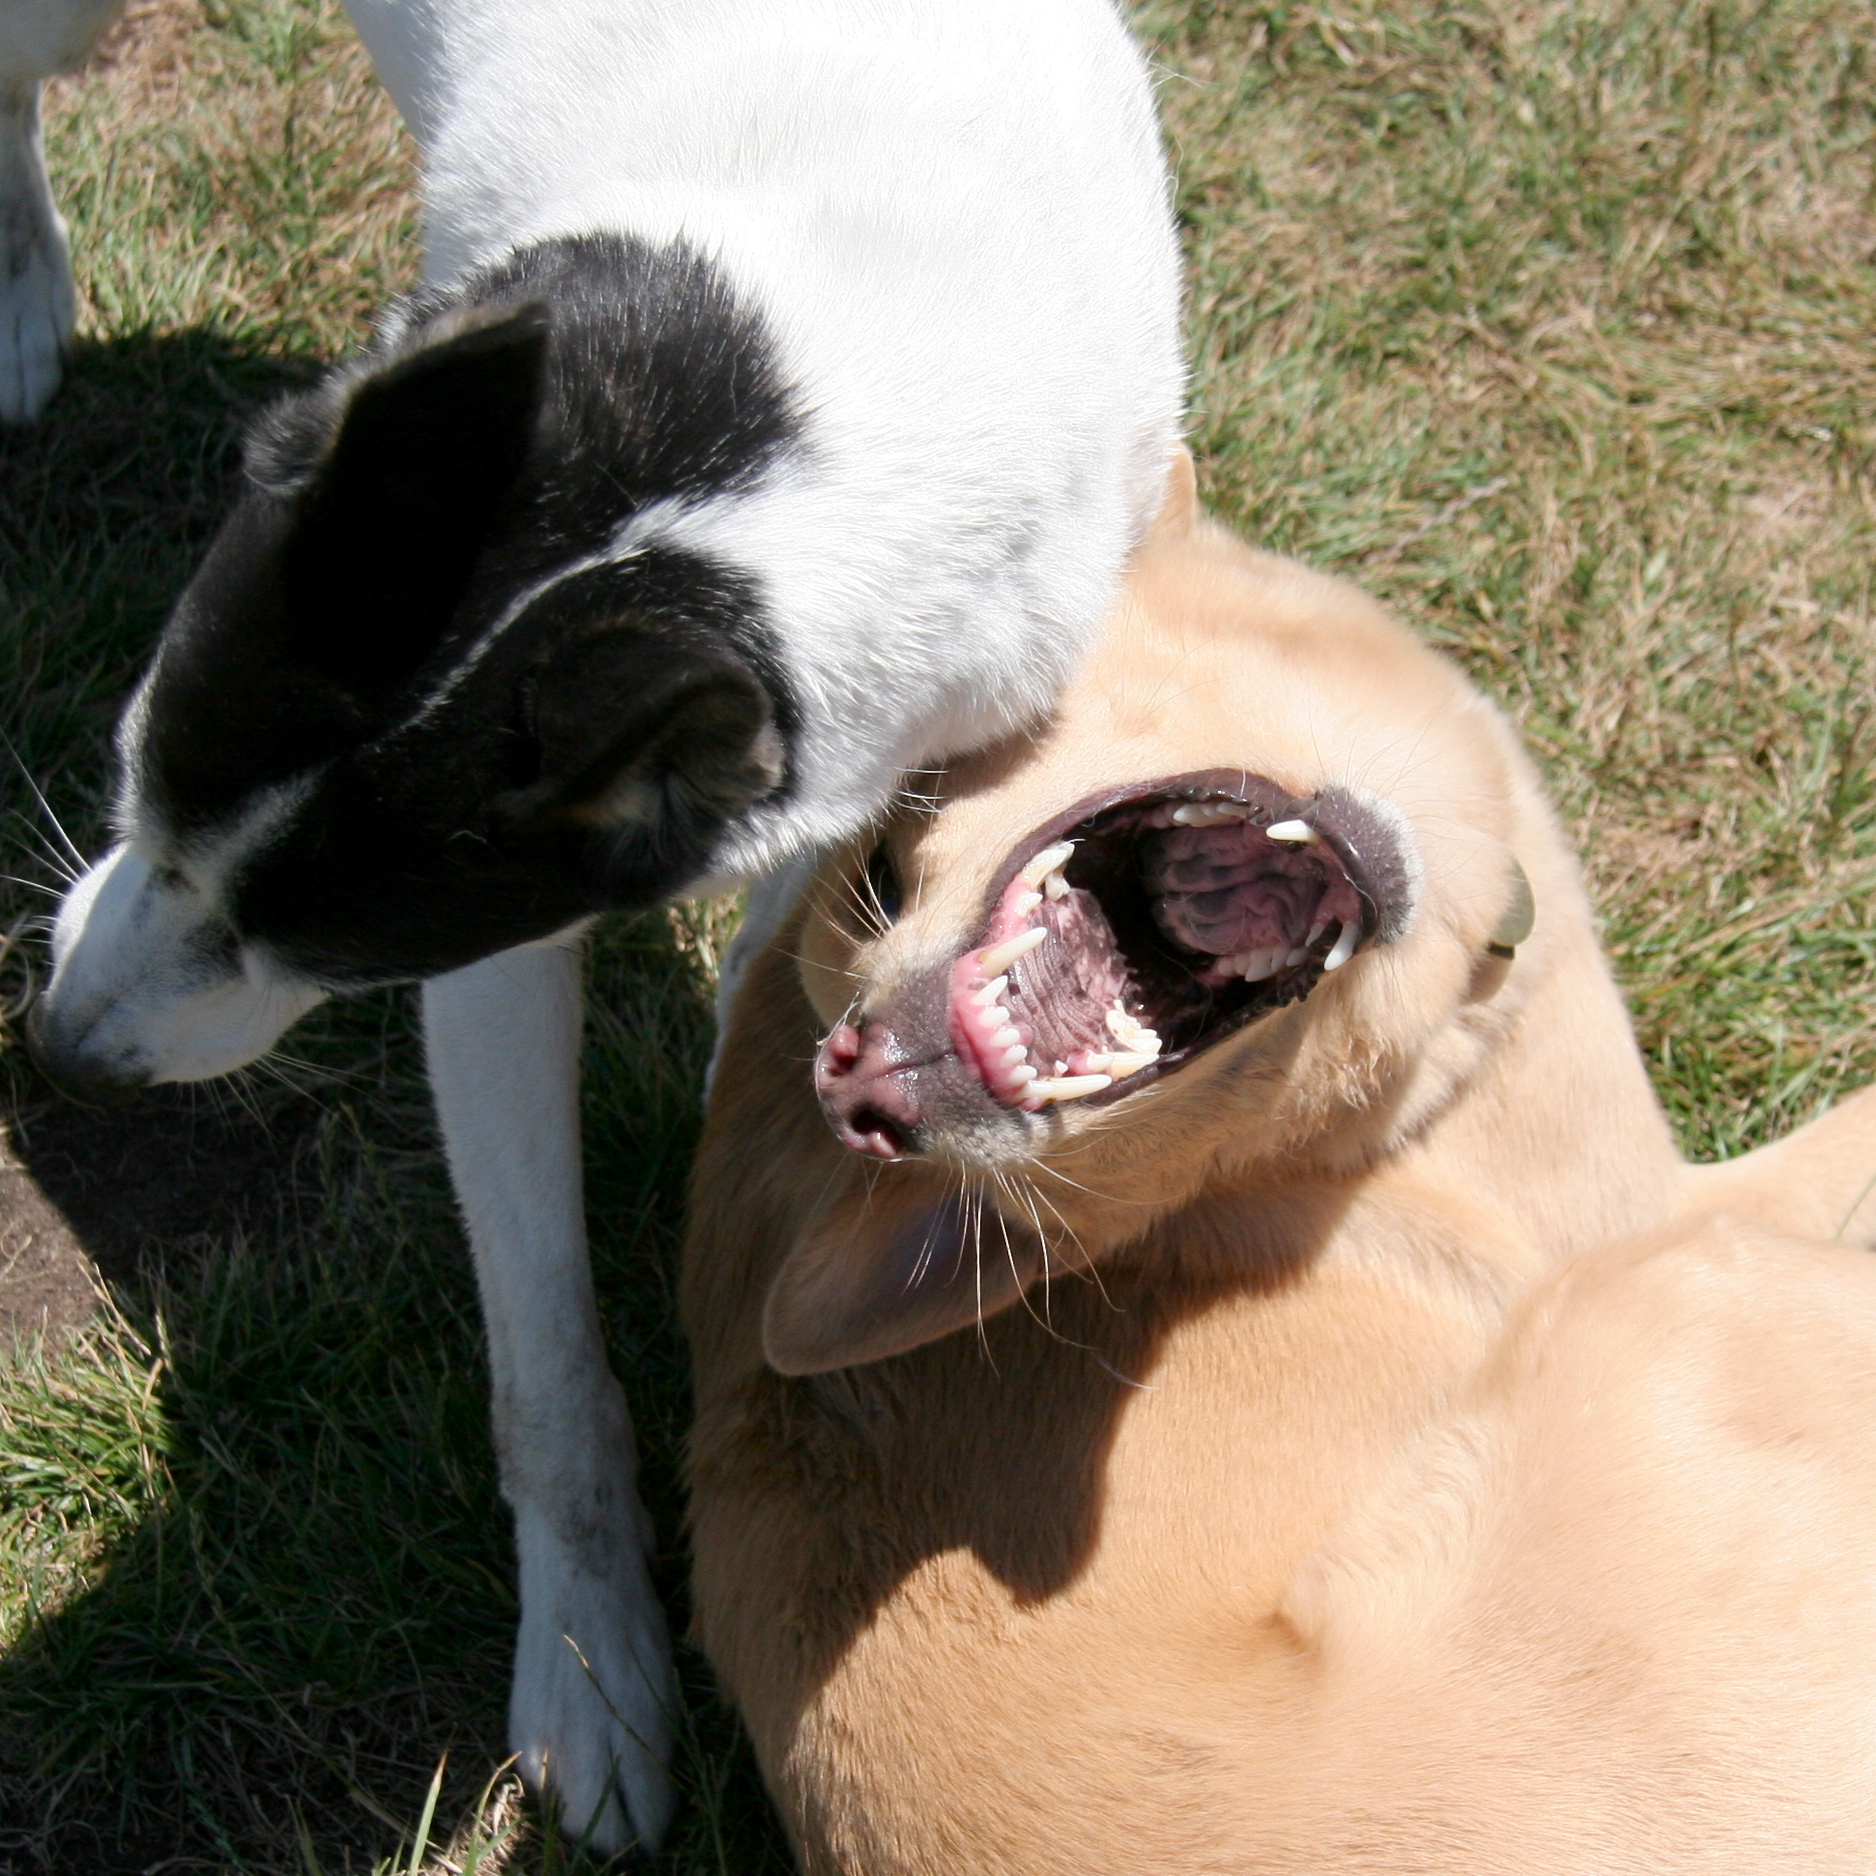 a small dog looks at the mouth of a larger dog